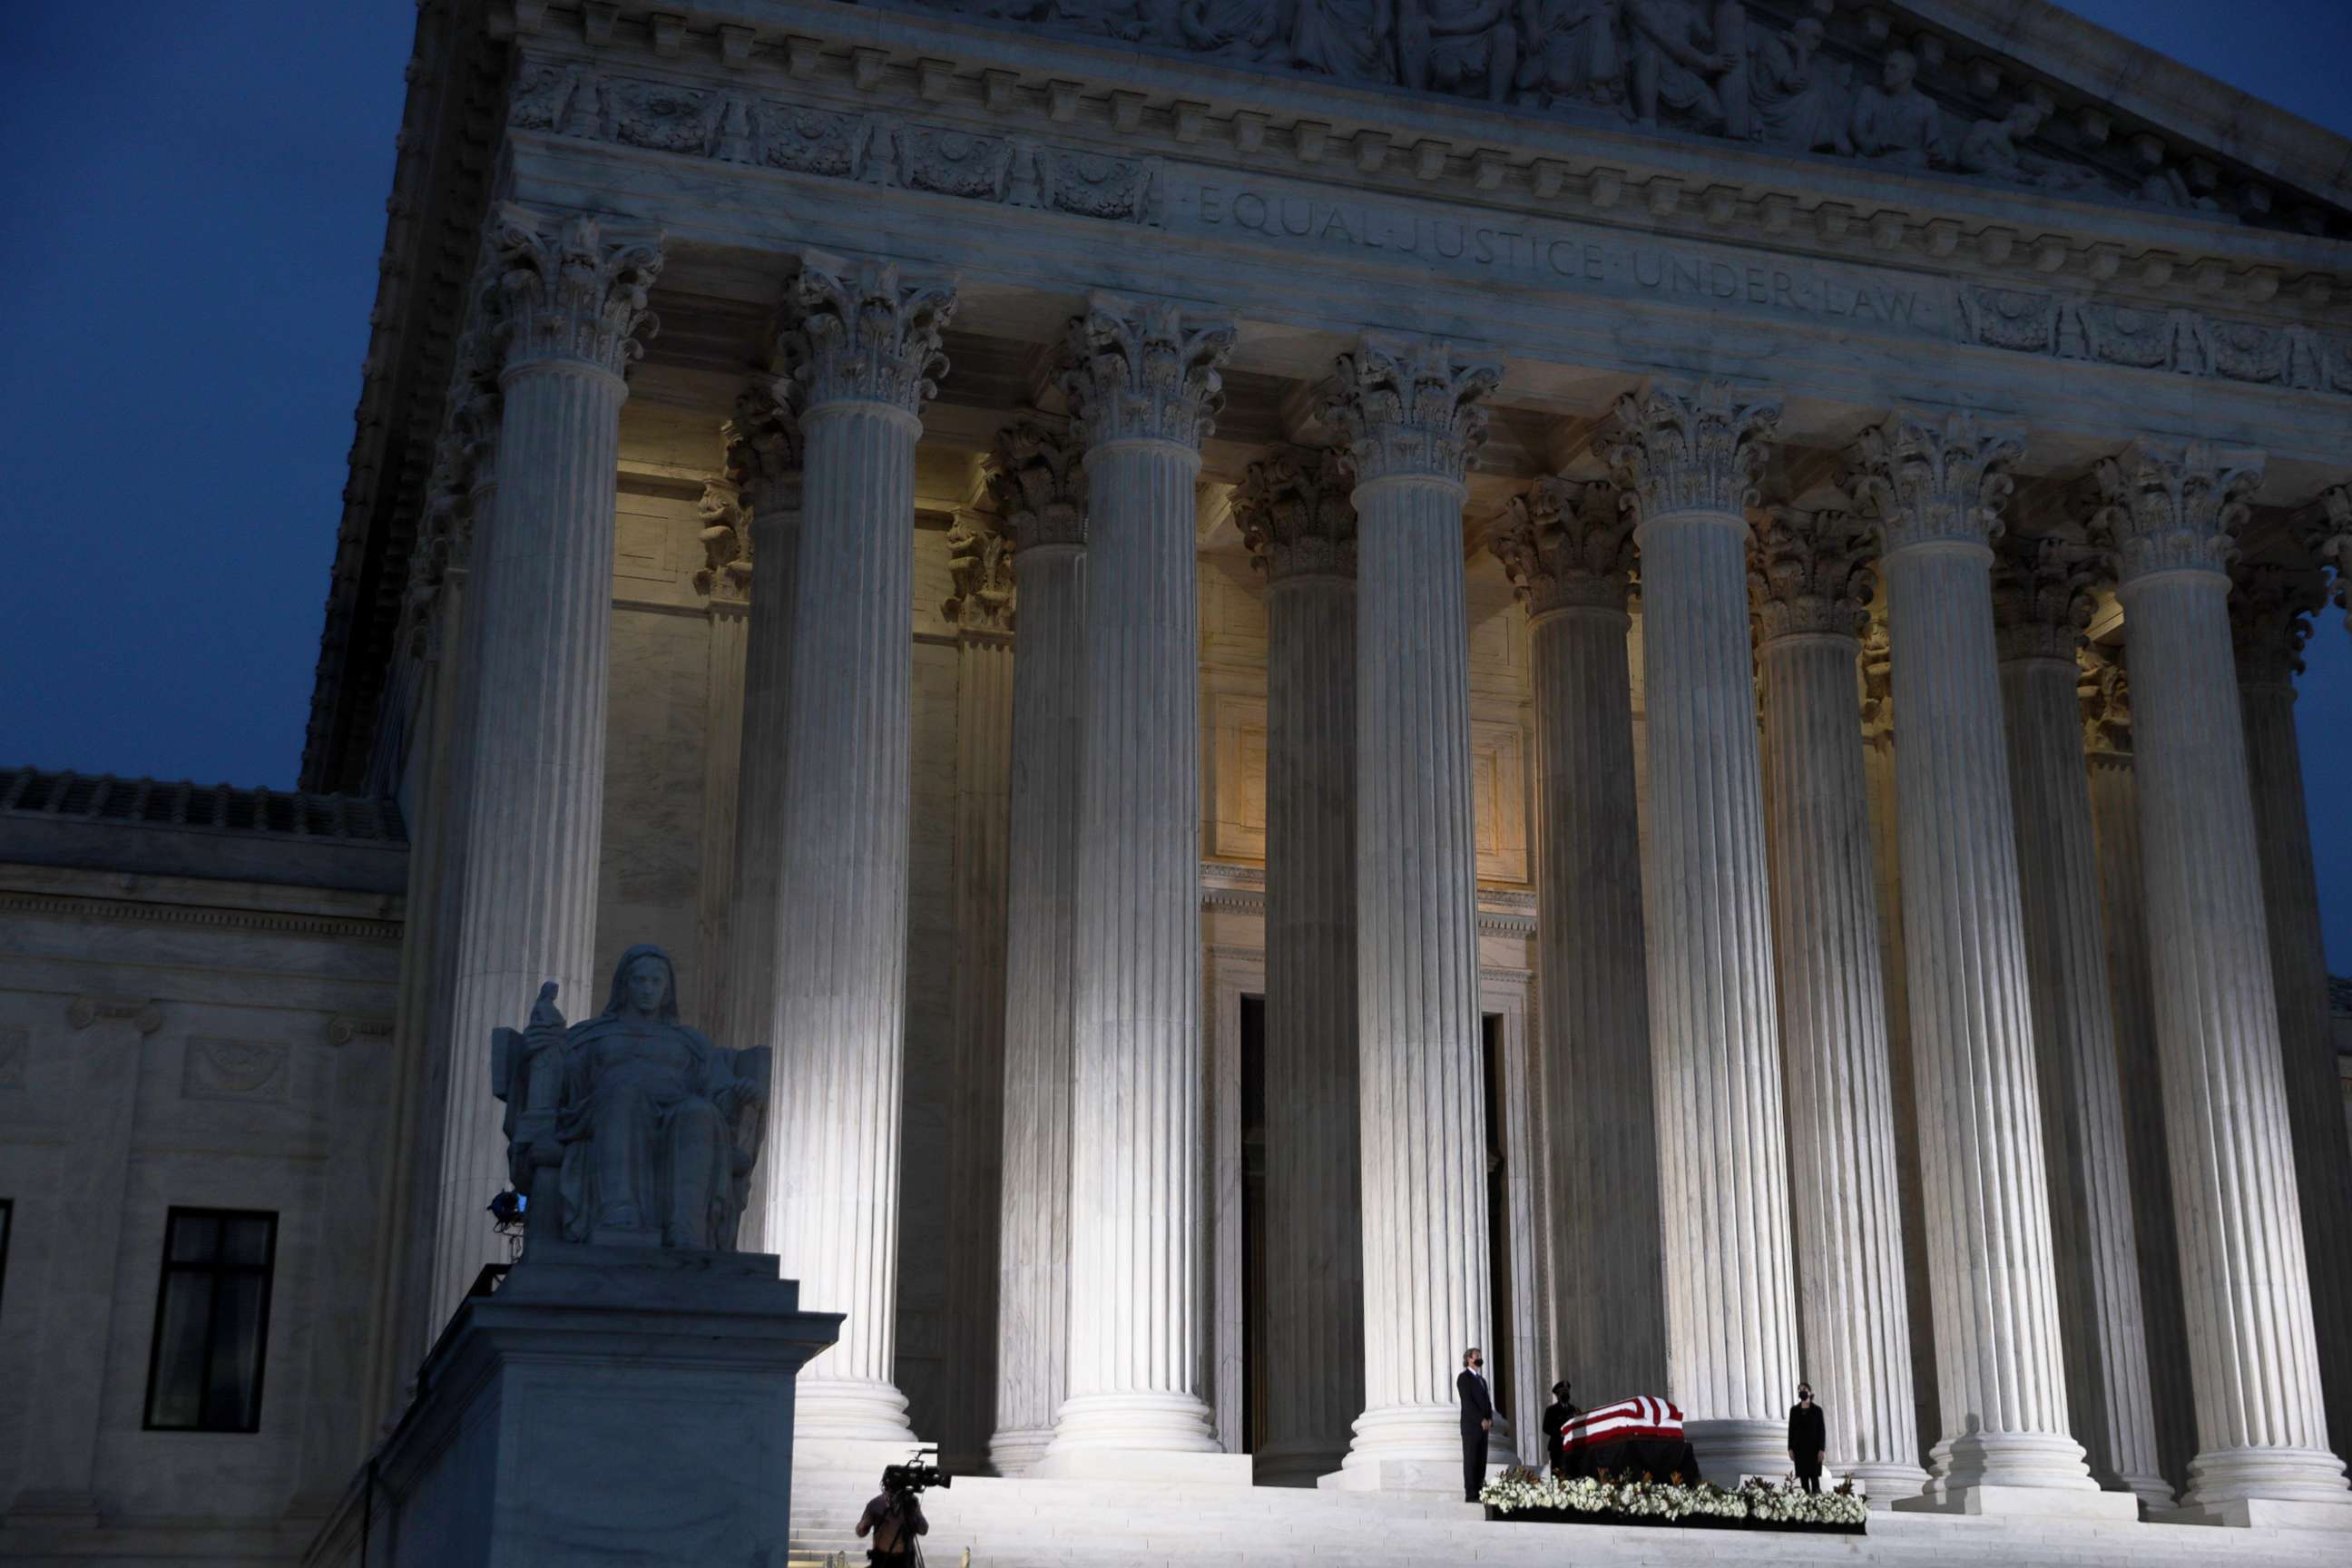 PHOTO: Members of the public pay respects to Associate Justice Ruth Bader Ginsburg as her flag-draped casket rests on the Lincoln catafalque on the west front of the U.S. Supreme Court, Sept. 23, 2020, in Washington, DC.